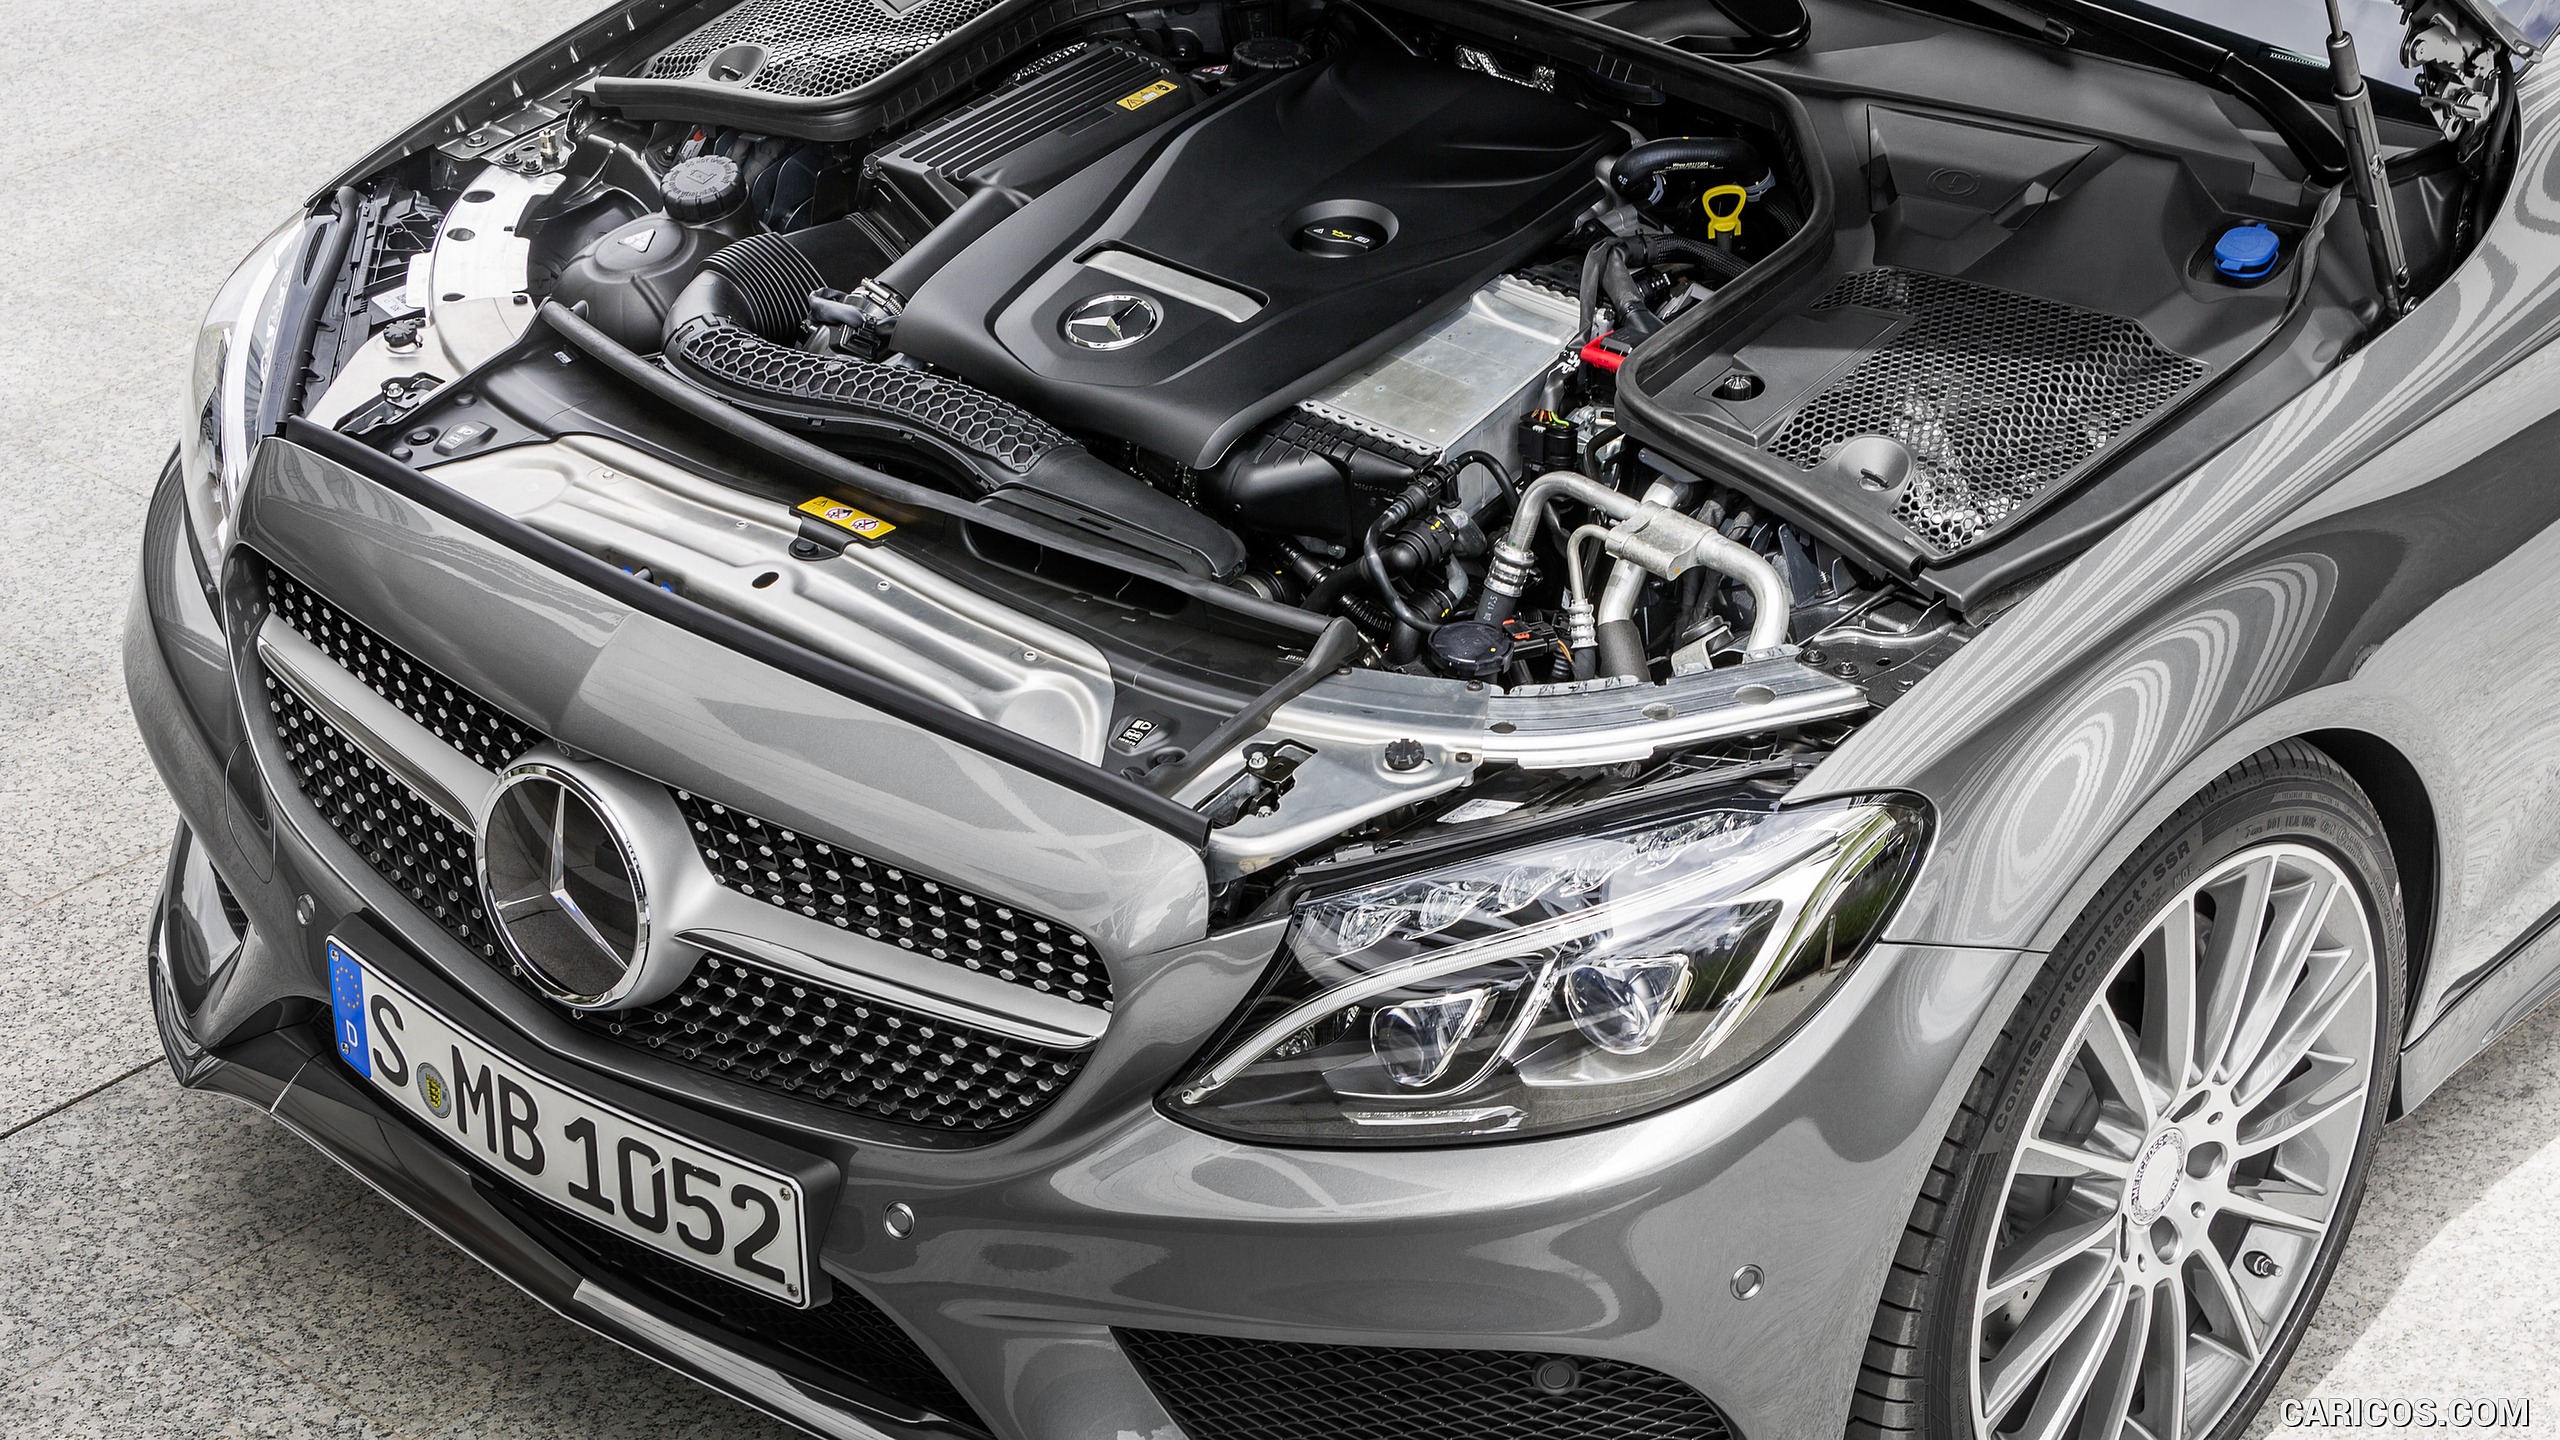 2017 Mercedes-Benz C-Class Coupe C300 (Selenit Grey) - Engine, #49 of 210